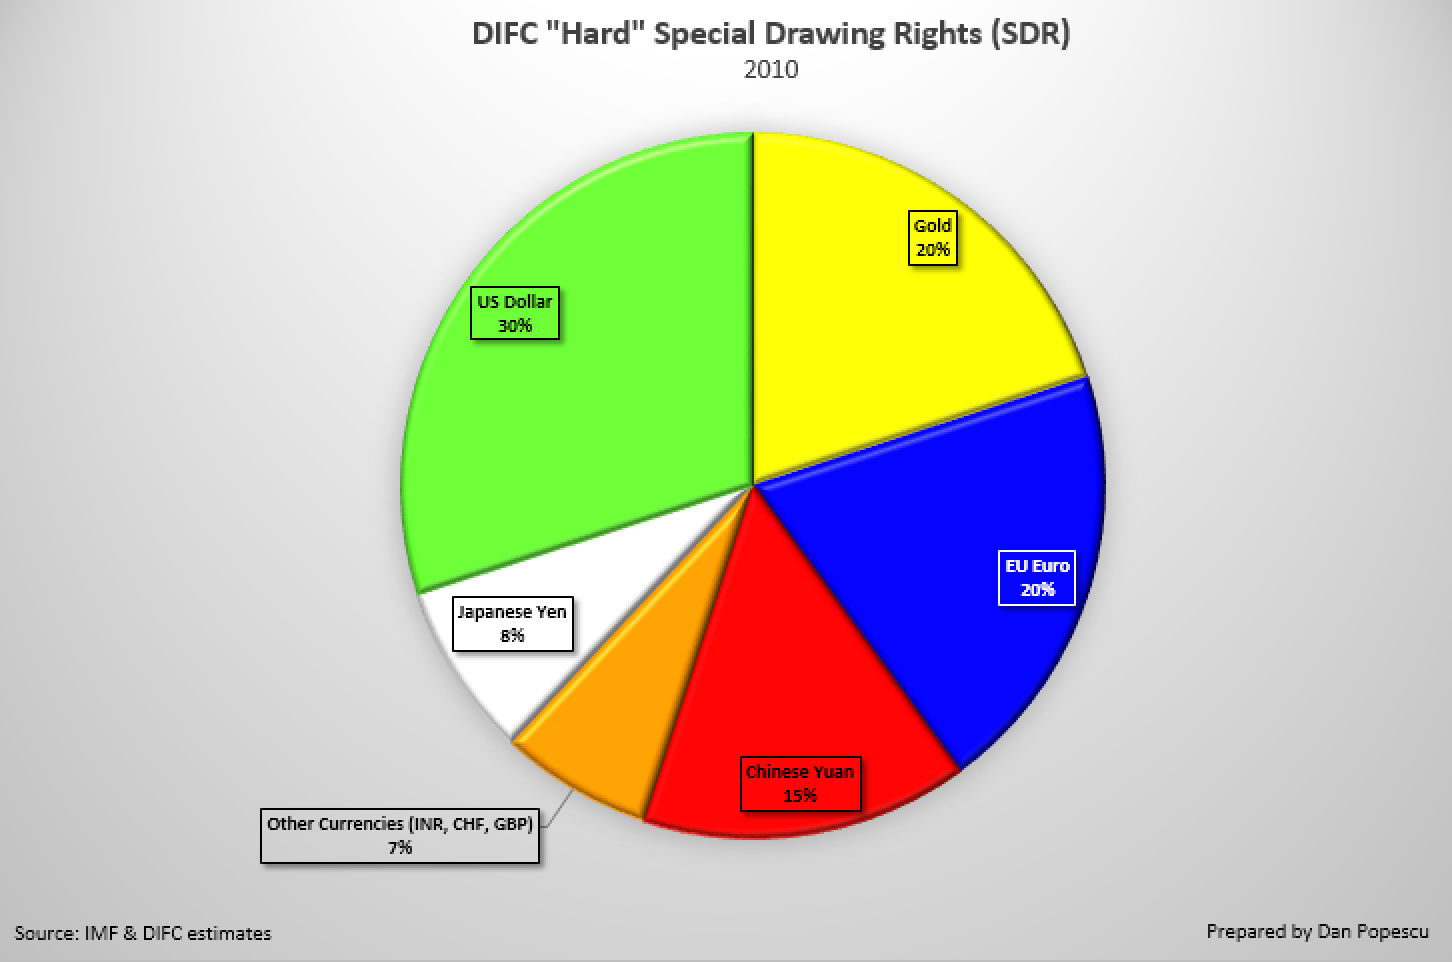  DIFC "Hard" Special Drwing Rights (SDR)